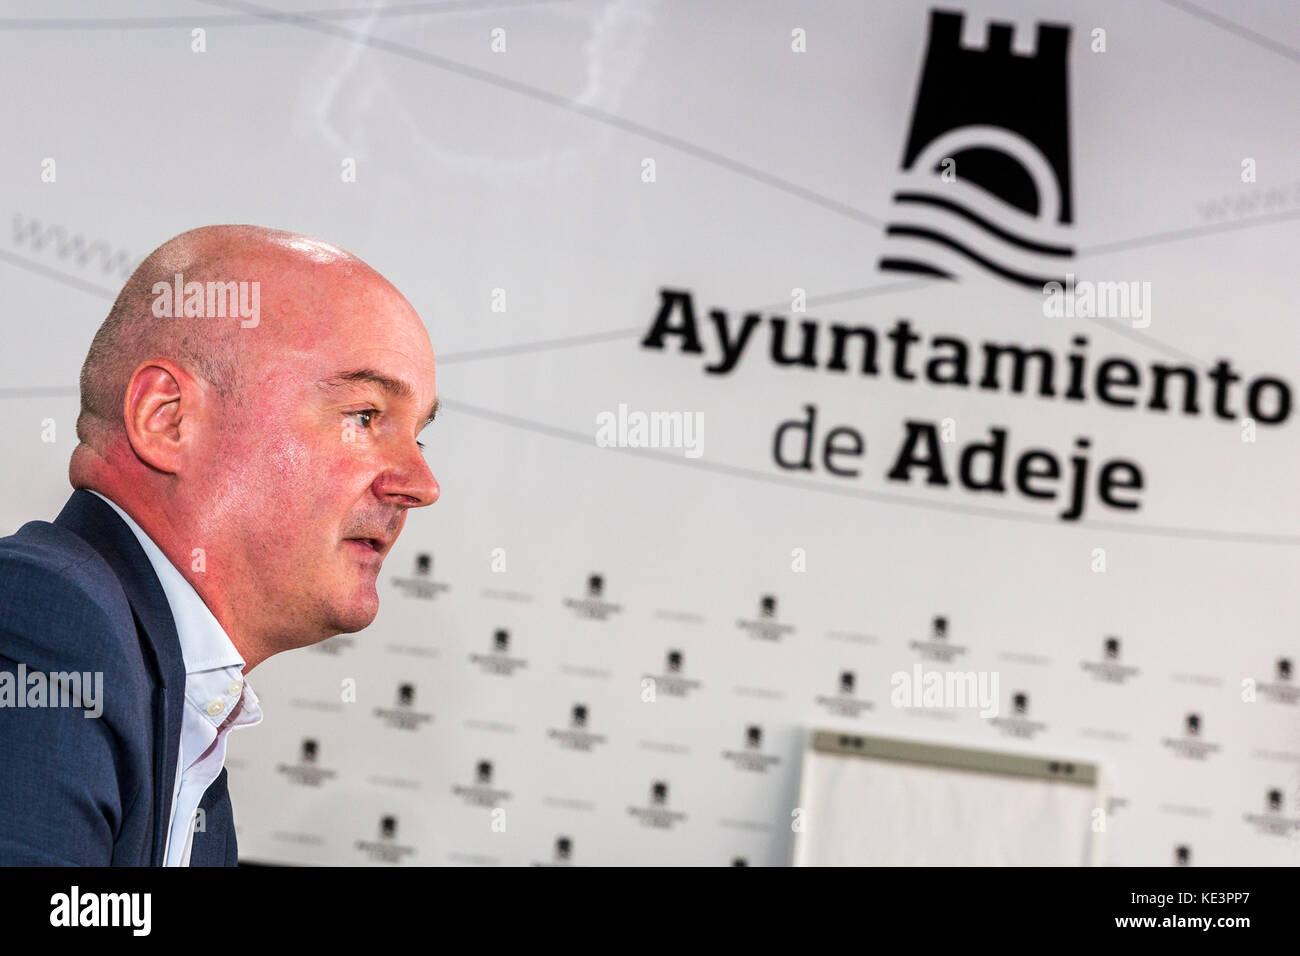 Adeje, Tenerife, Canary Islands, Spain. 18 October 2017. Mr Tim Hemmings, Deputy Head of Mission, British Embassy, at the Adeje Cultural Centre, in a press briefing before meeting with British expats to talk about the implications for them with regards to the ongoing Brexit negotiations. ©Phil Crean Credit: Phil Crean A/Alamy Live News Credit: Phil Crean A/Alamy Live News Stock Photo